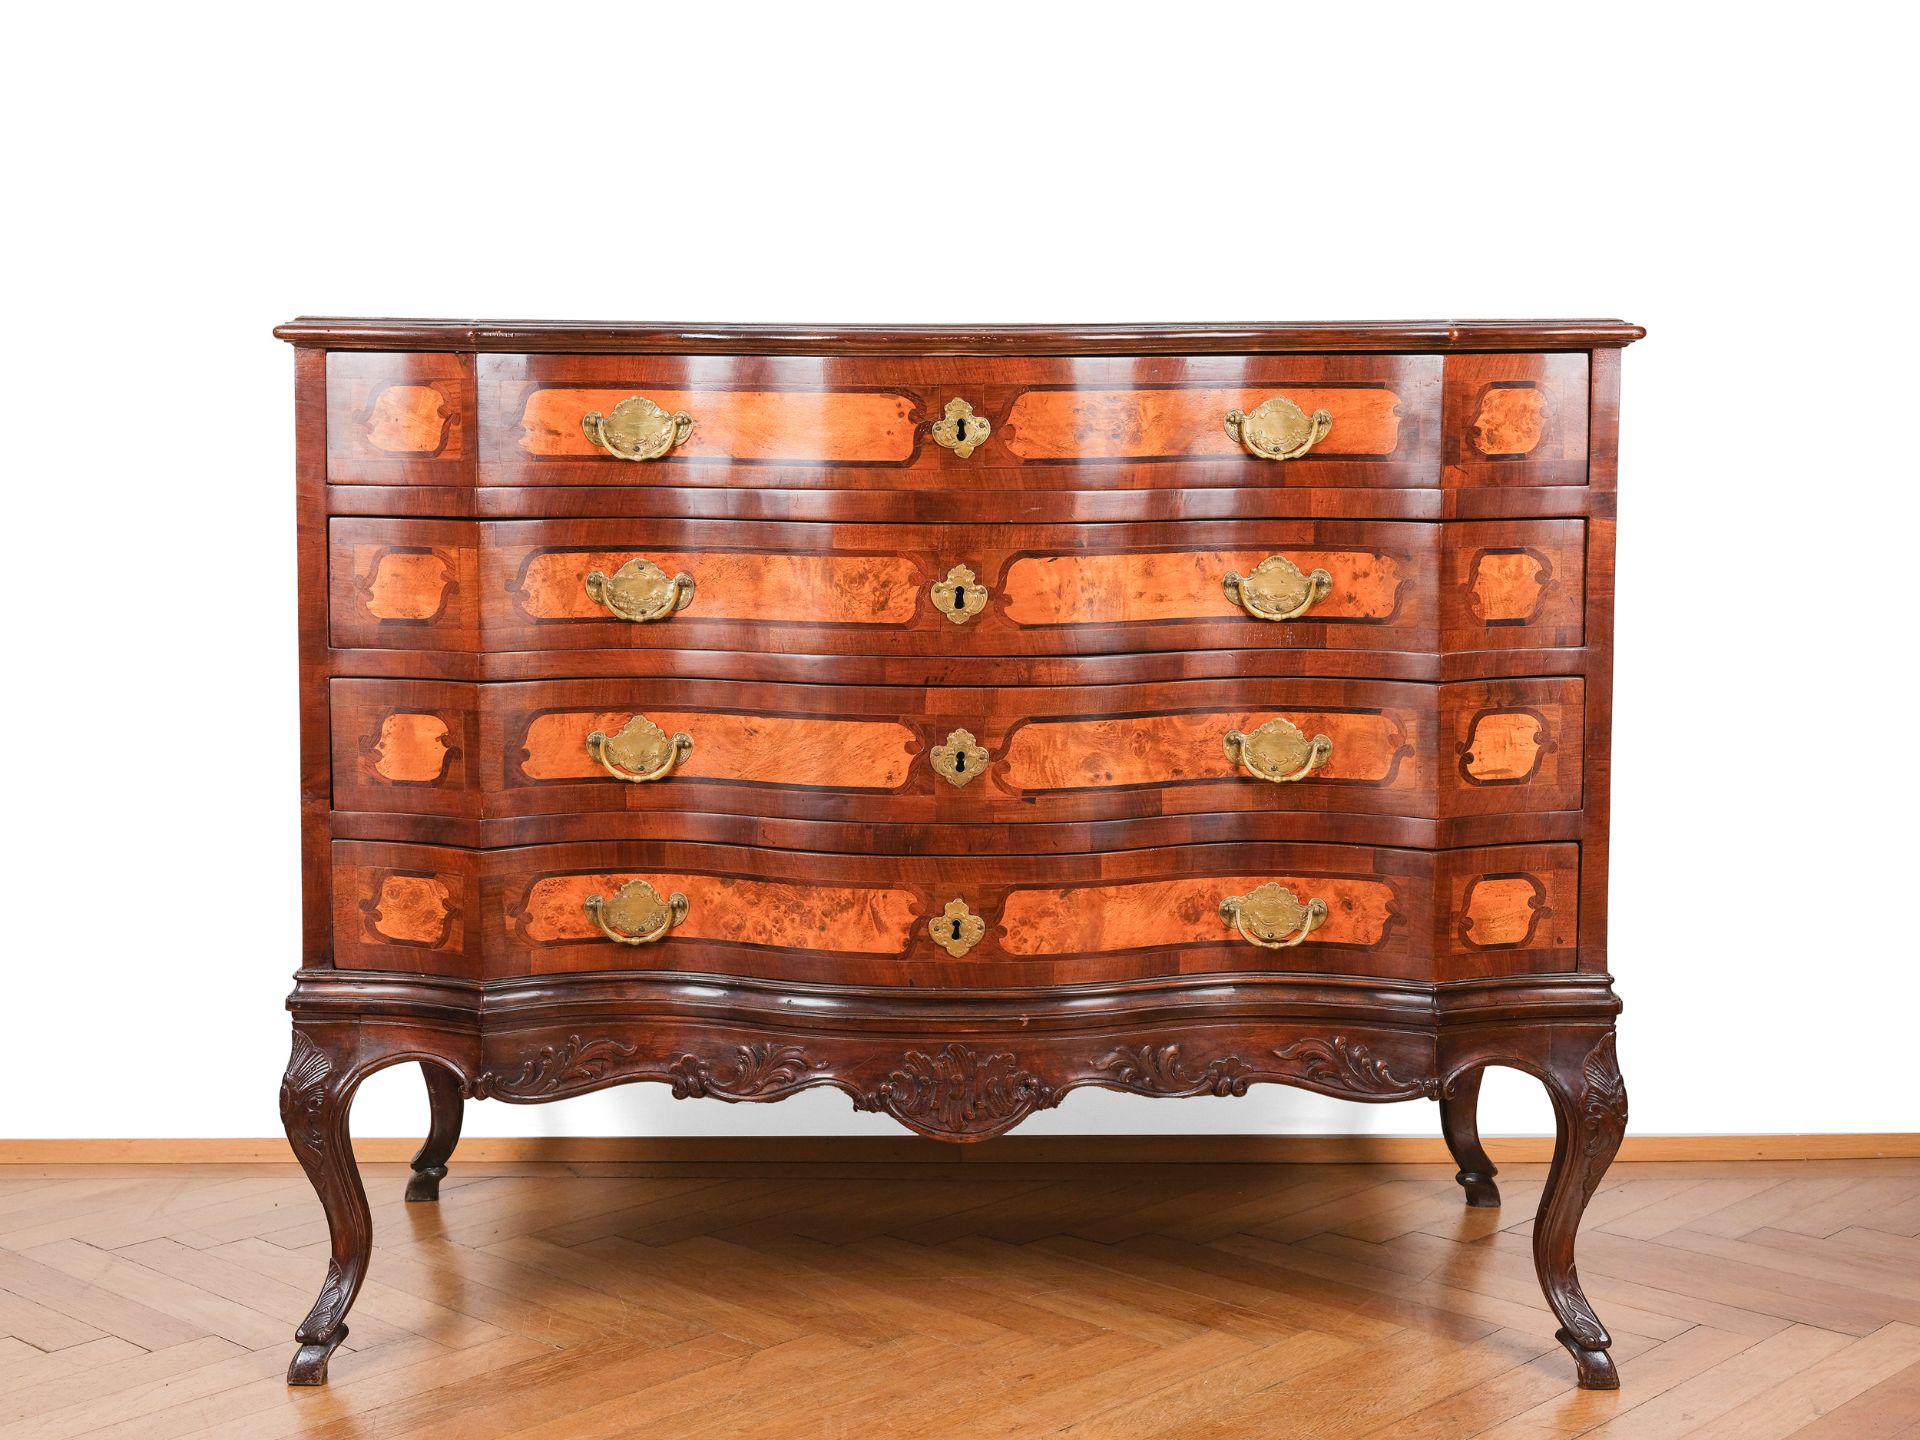 Chest with drawers, Four drawers, South German